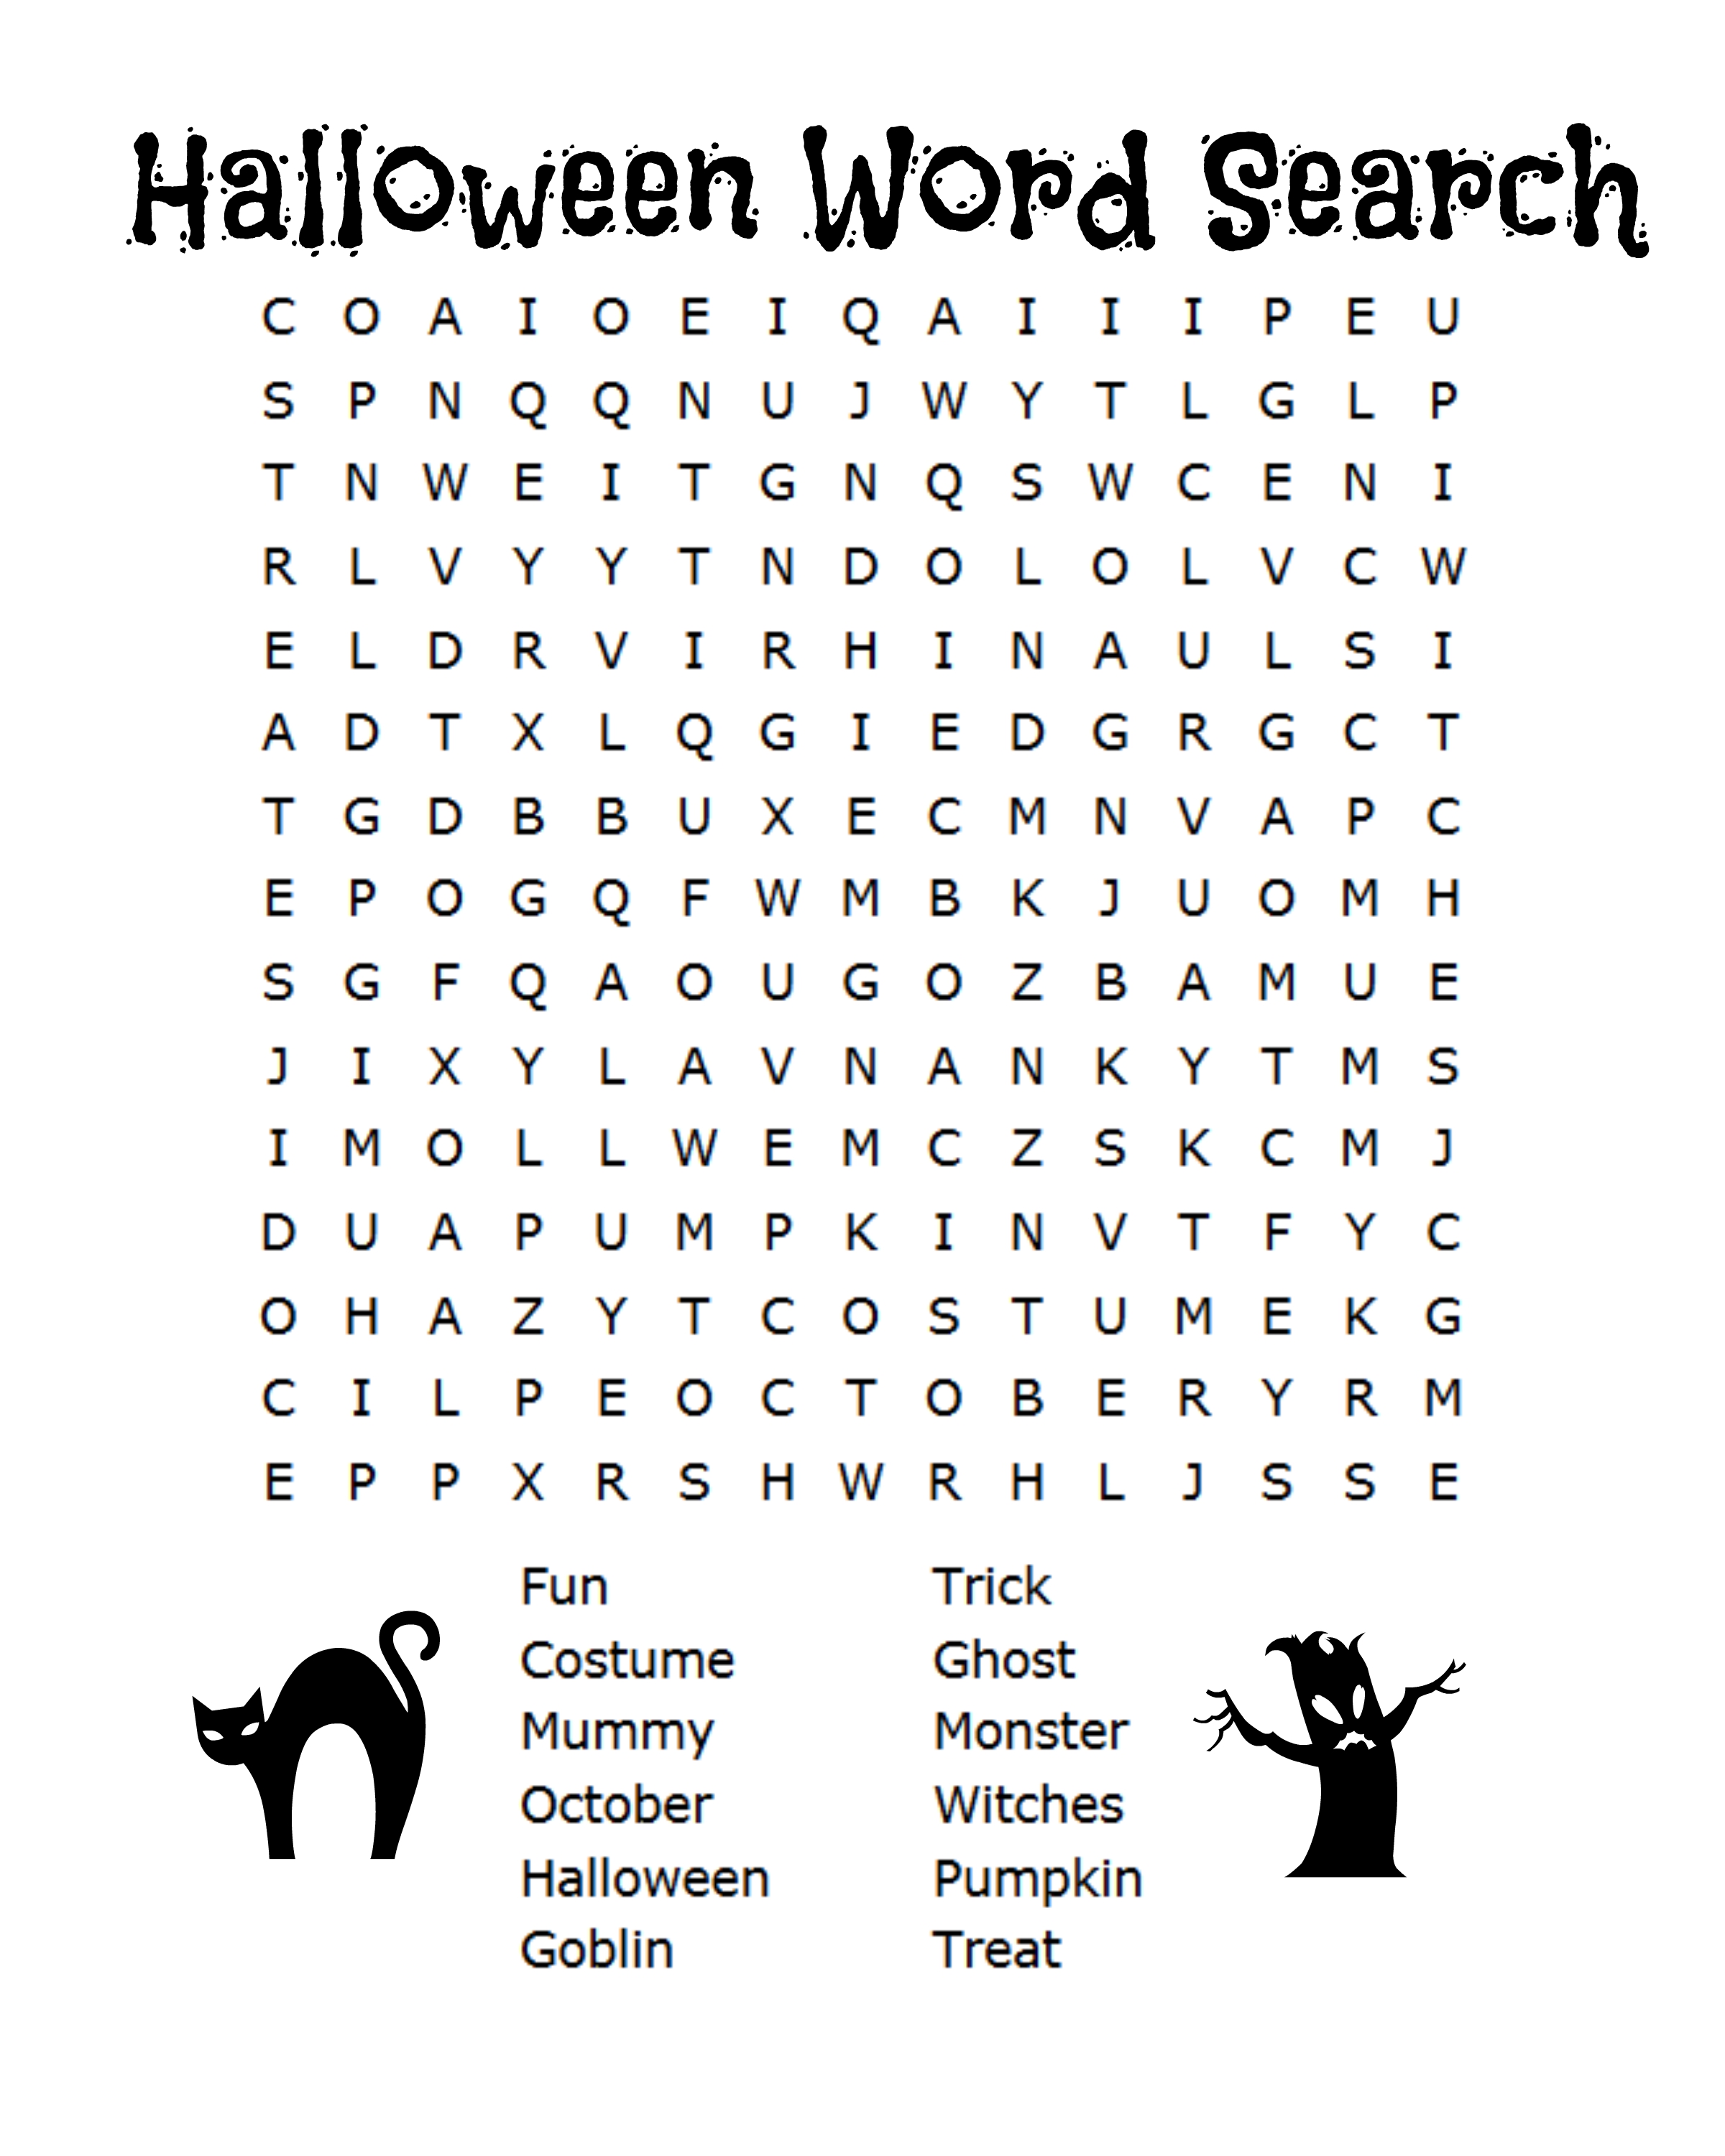 colors-word-search-free-printable-for-kids